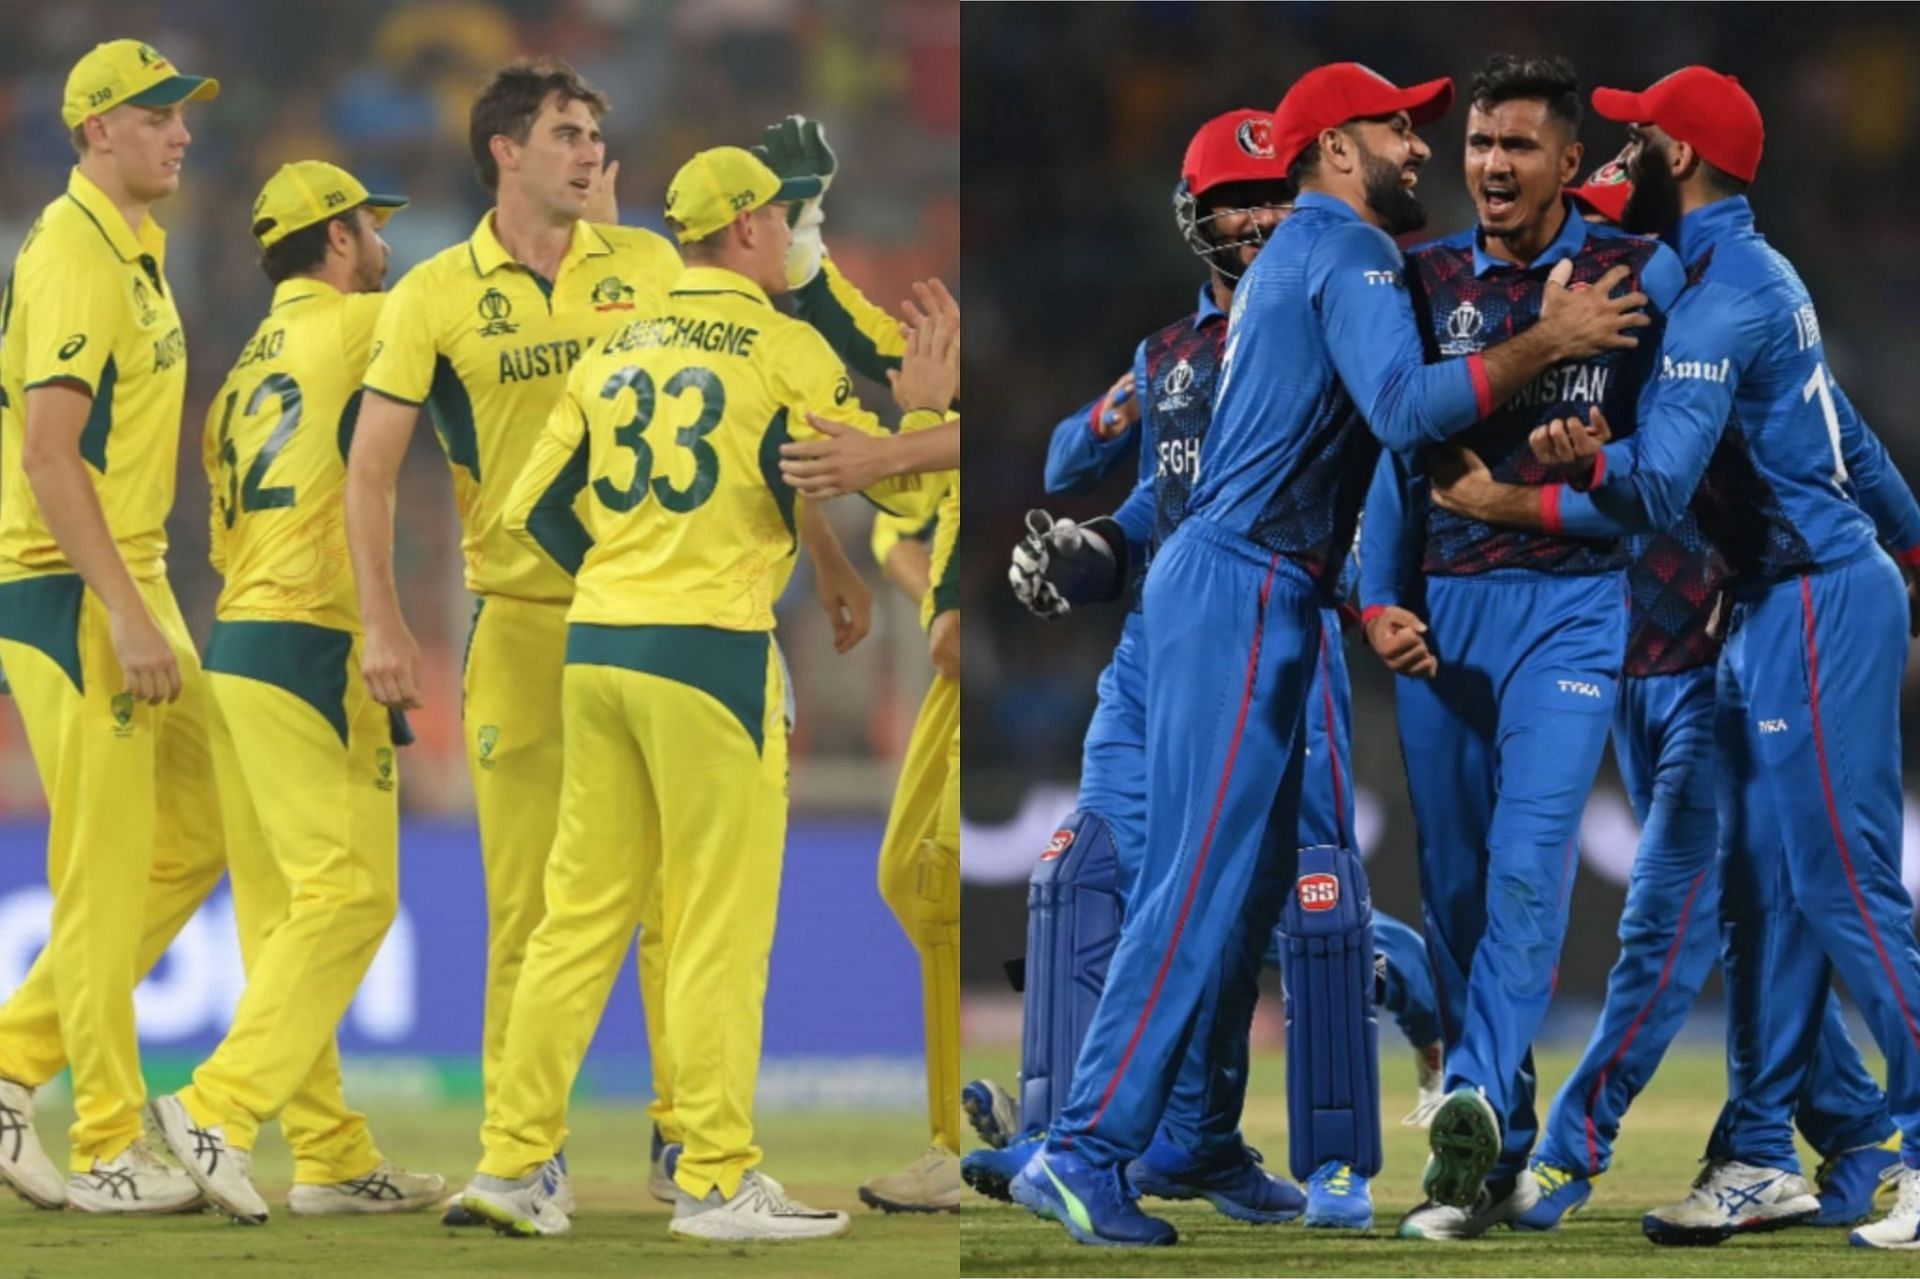 Australia will take on Afghanistan on Tuesday [Getty Images]